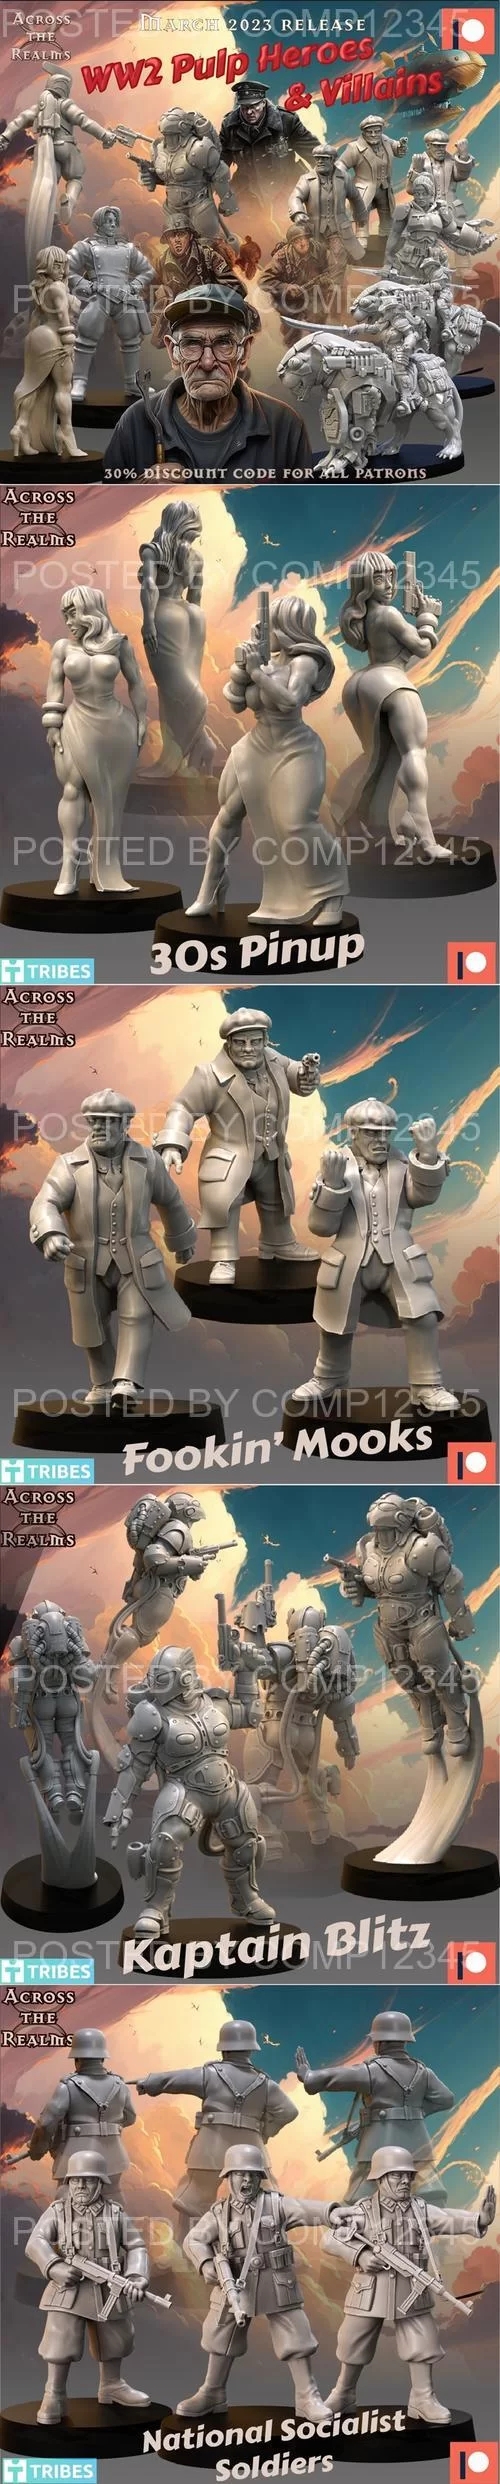 Across the Realms - WW2 Pulp Heroes and Villains March 2023 3D Print